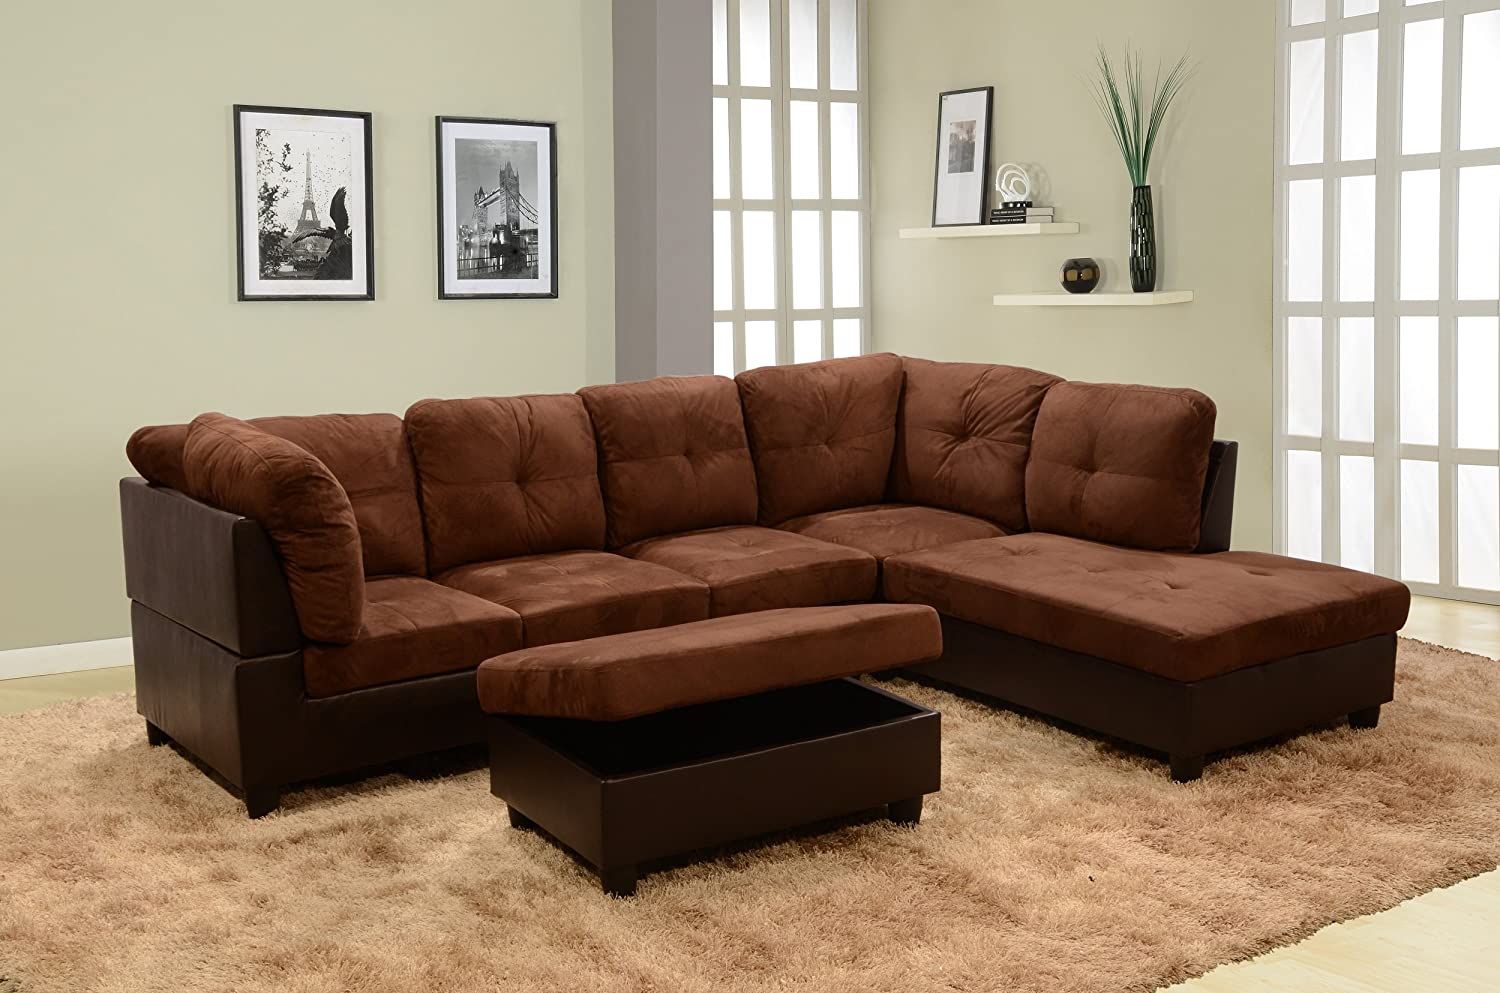 Ainehome 3 Pcs Living Room Set, Sectional Sofa Set Regarding Monet Right Facing Sectional Sofas (View 2 of 15)